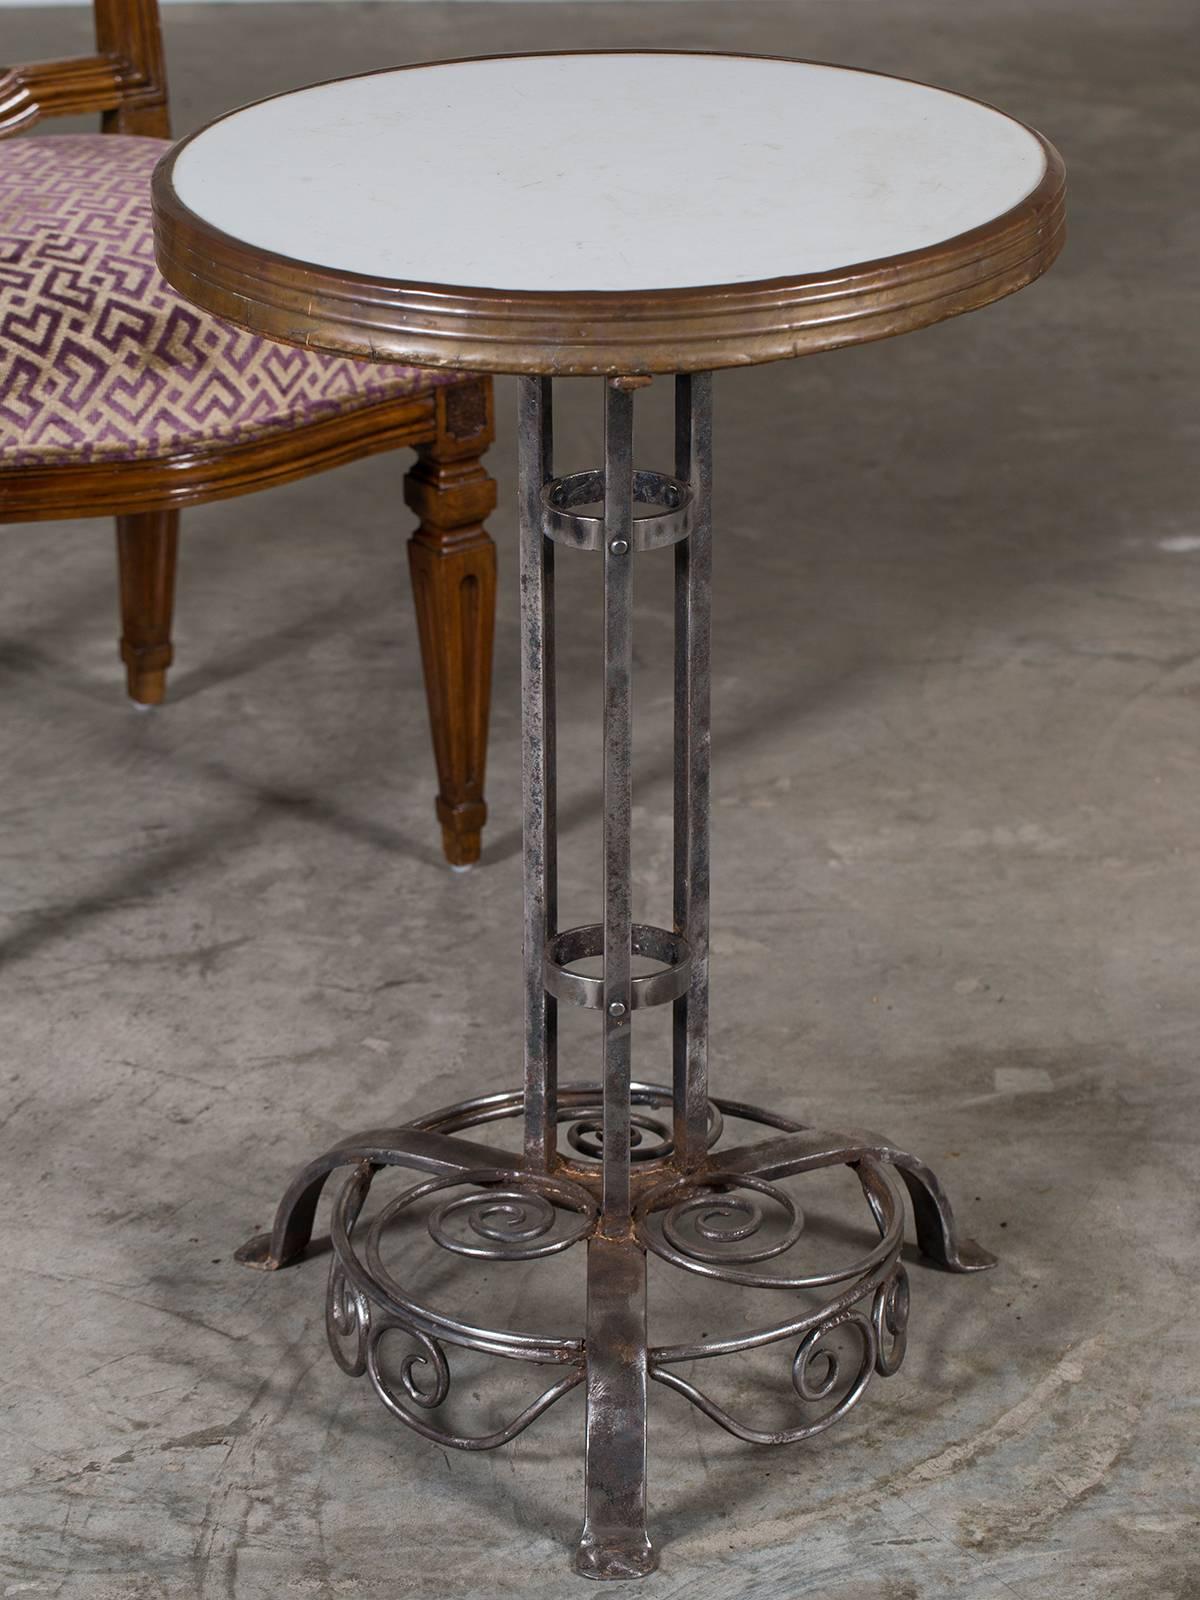 Be the first to see our new selections direct from 1stdibs! Please click on follow below.

A striking antique German iron cafe bistro table from Munich, circa 1910. The central column has three vertical supports joined by two rings on the